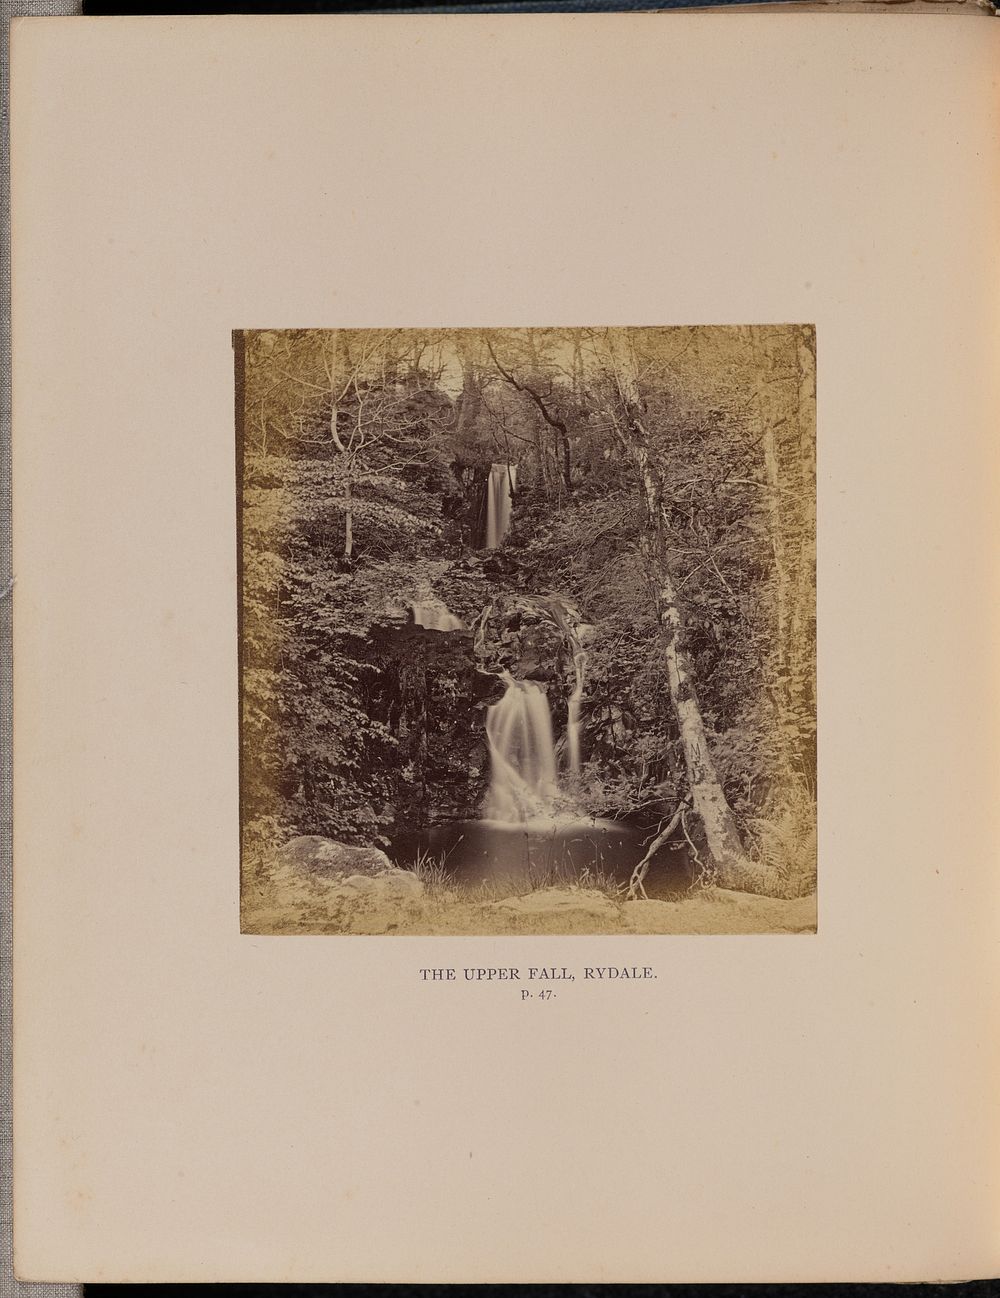 The Upper Fall, Rydale by Thomas Ogle